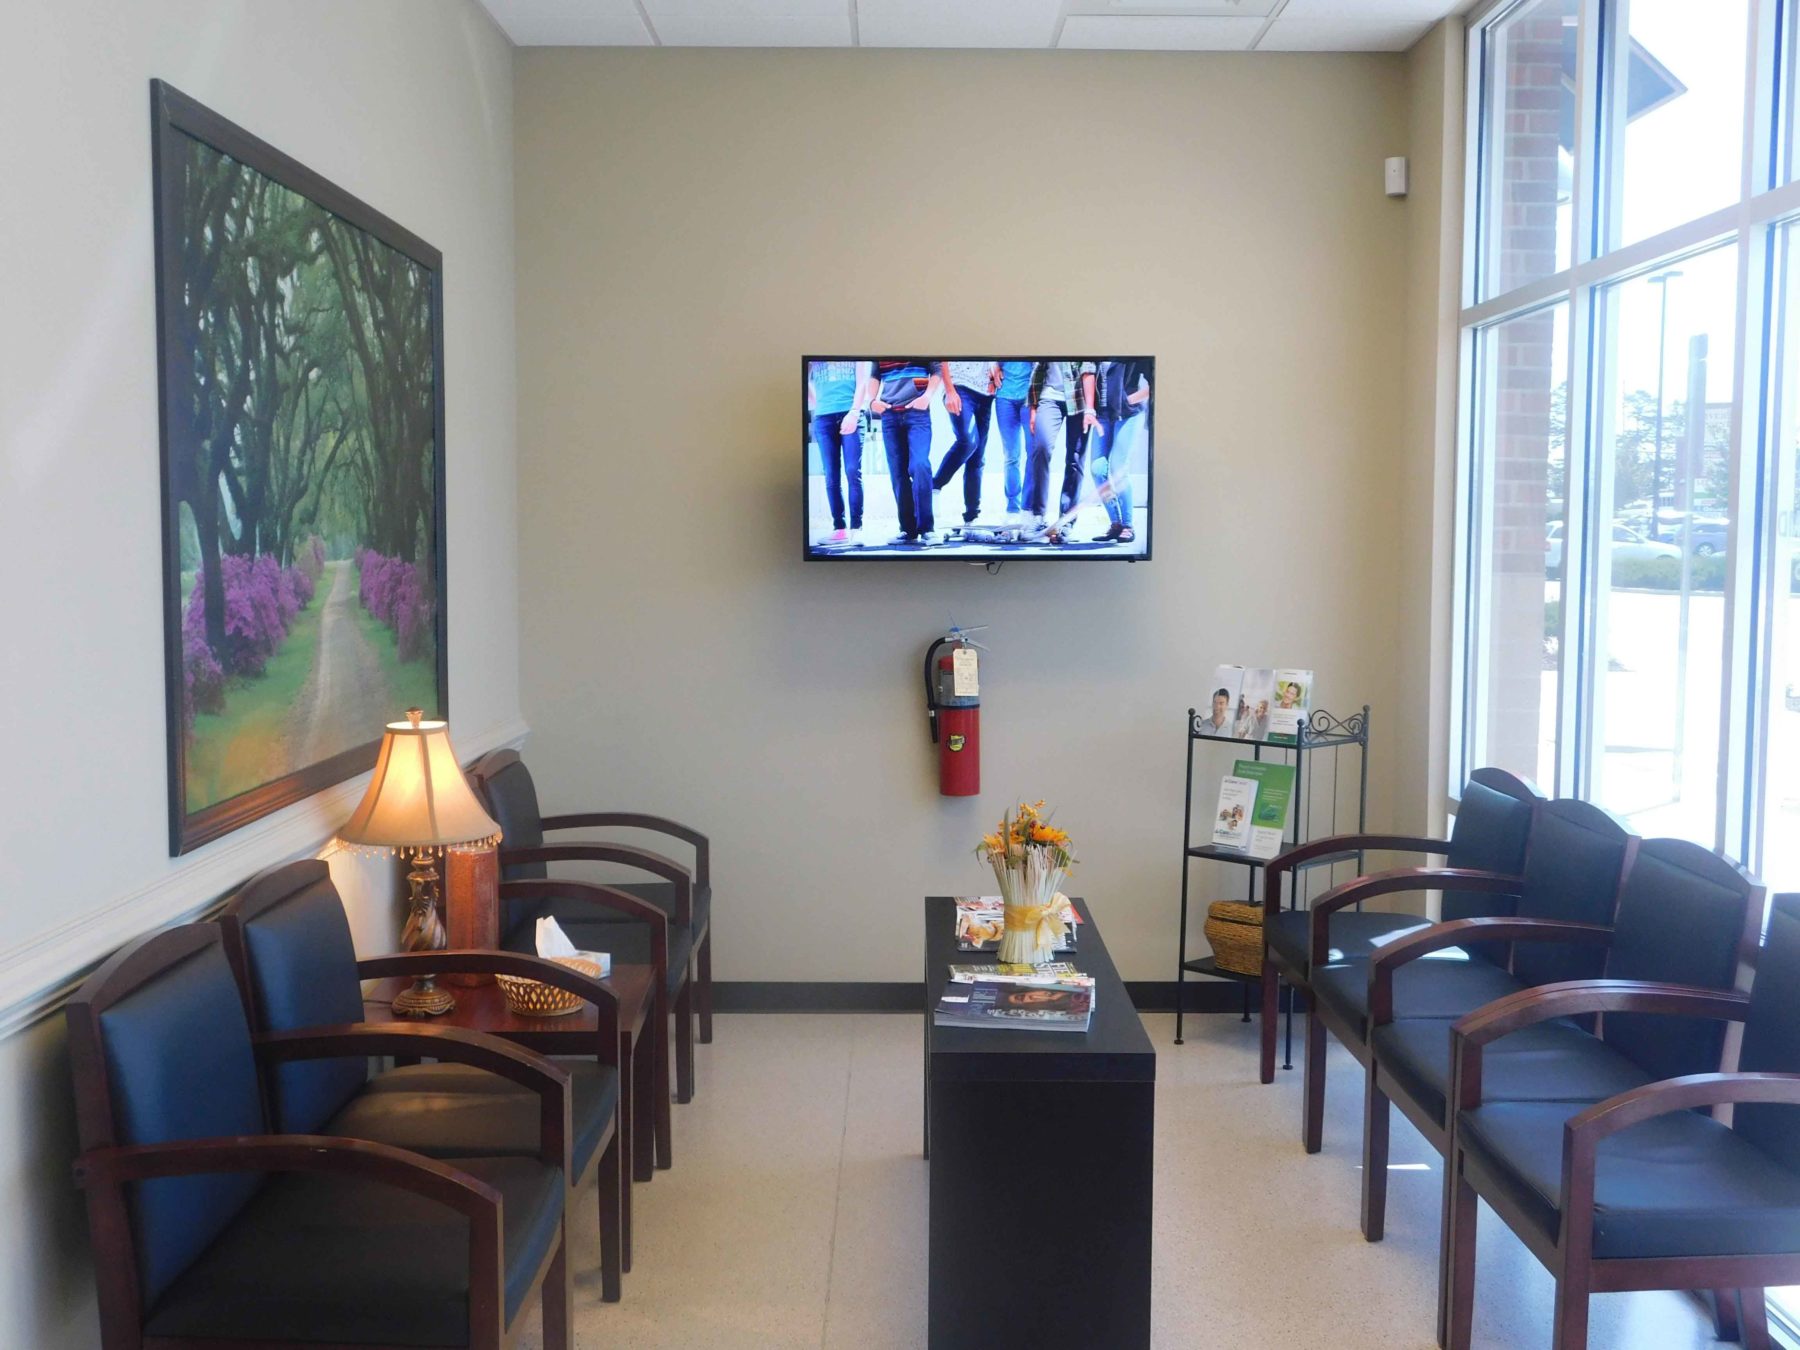 Oral Surgery Associates of Charlotte Image 1